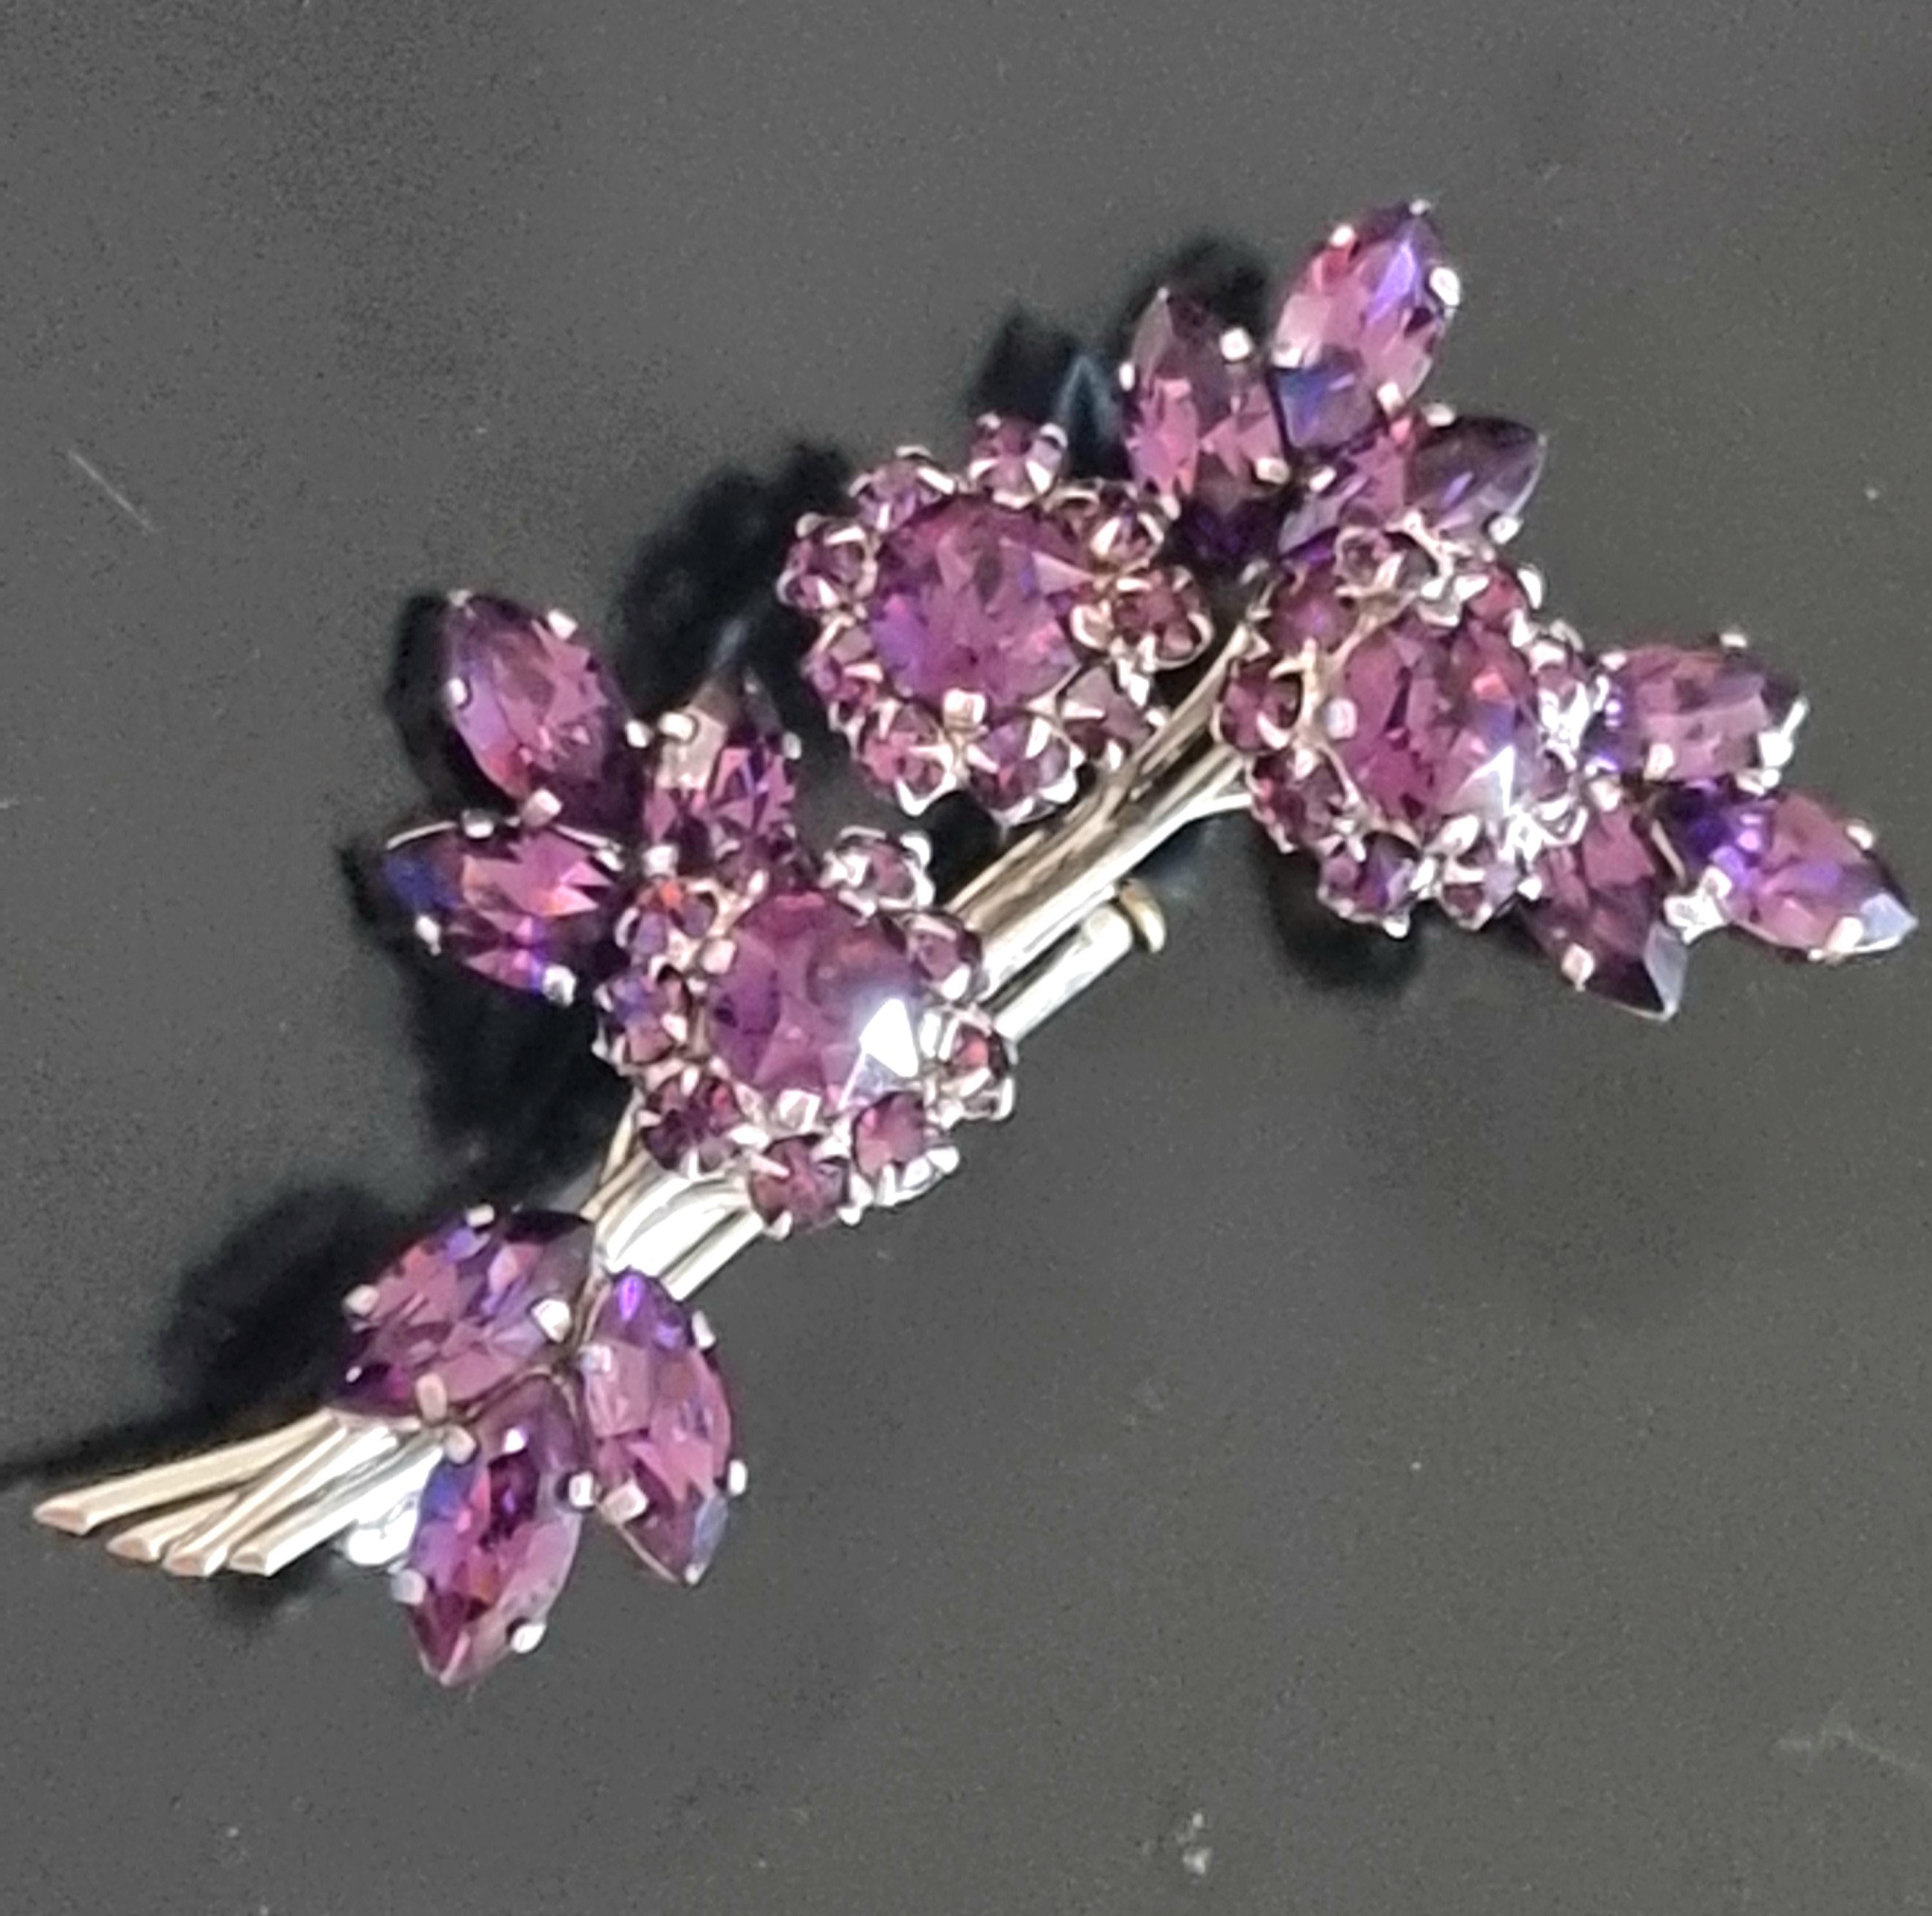 Magnificent old BROOCH:
vintage 50's,
in silver metal, glass rhinestones,
by High Fashion designer ROGER Jean Pierre,
Brooch dimensions 6.5 x 4 cm, weight 15 g,
good condition.

The French jeweler and designer, famous parurier Roger Jean Pierre has